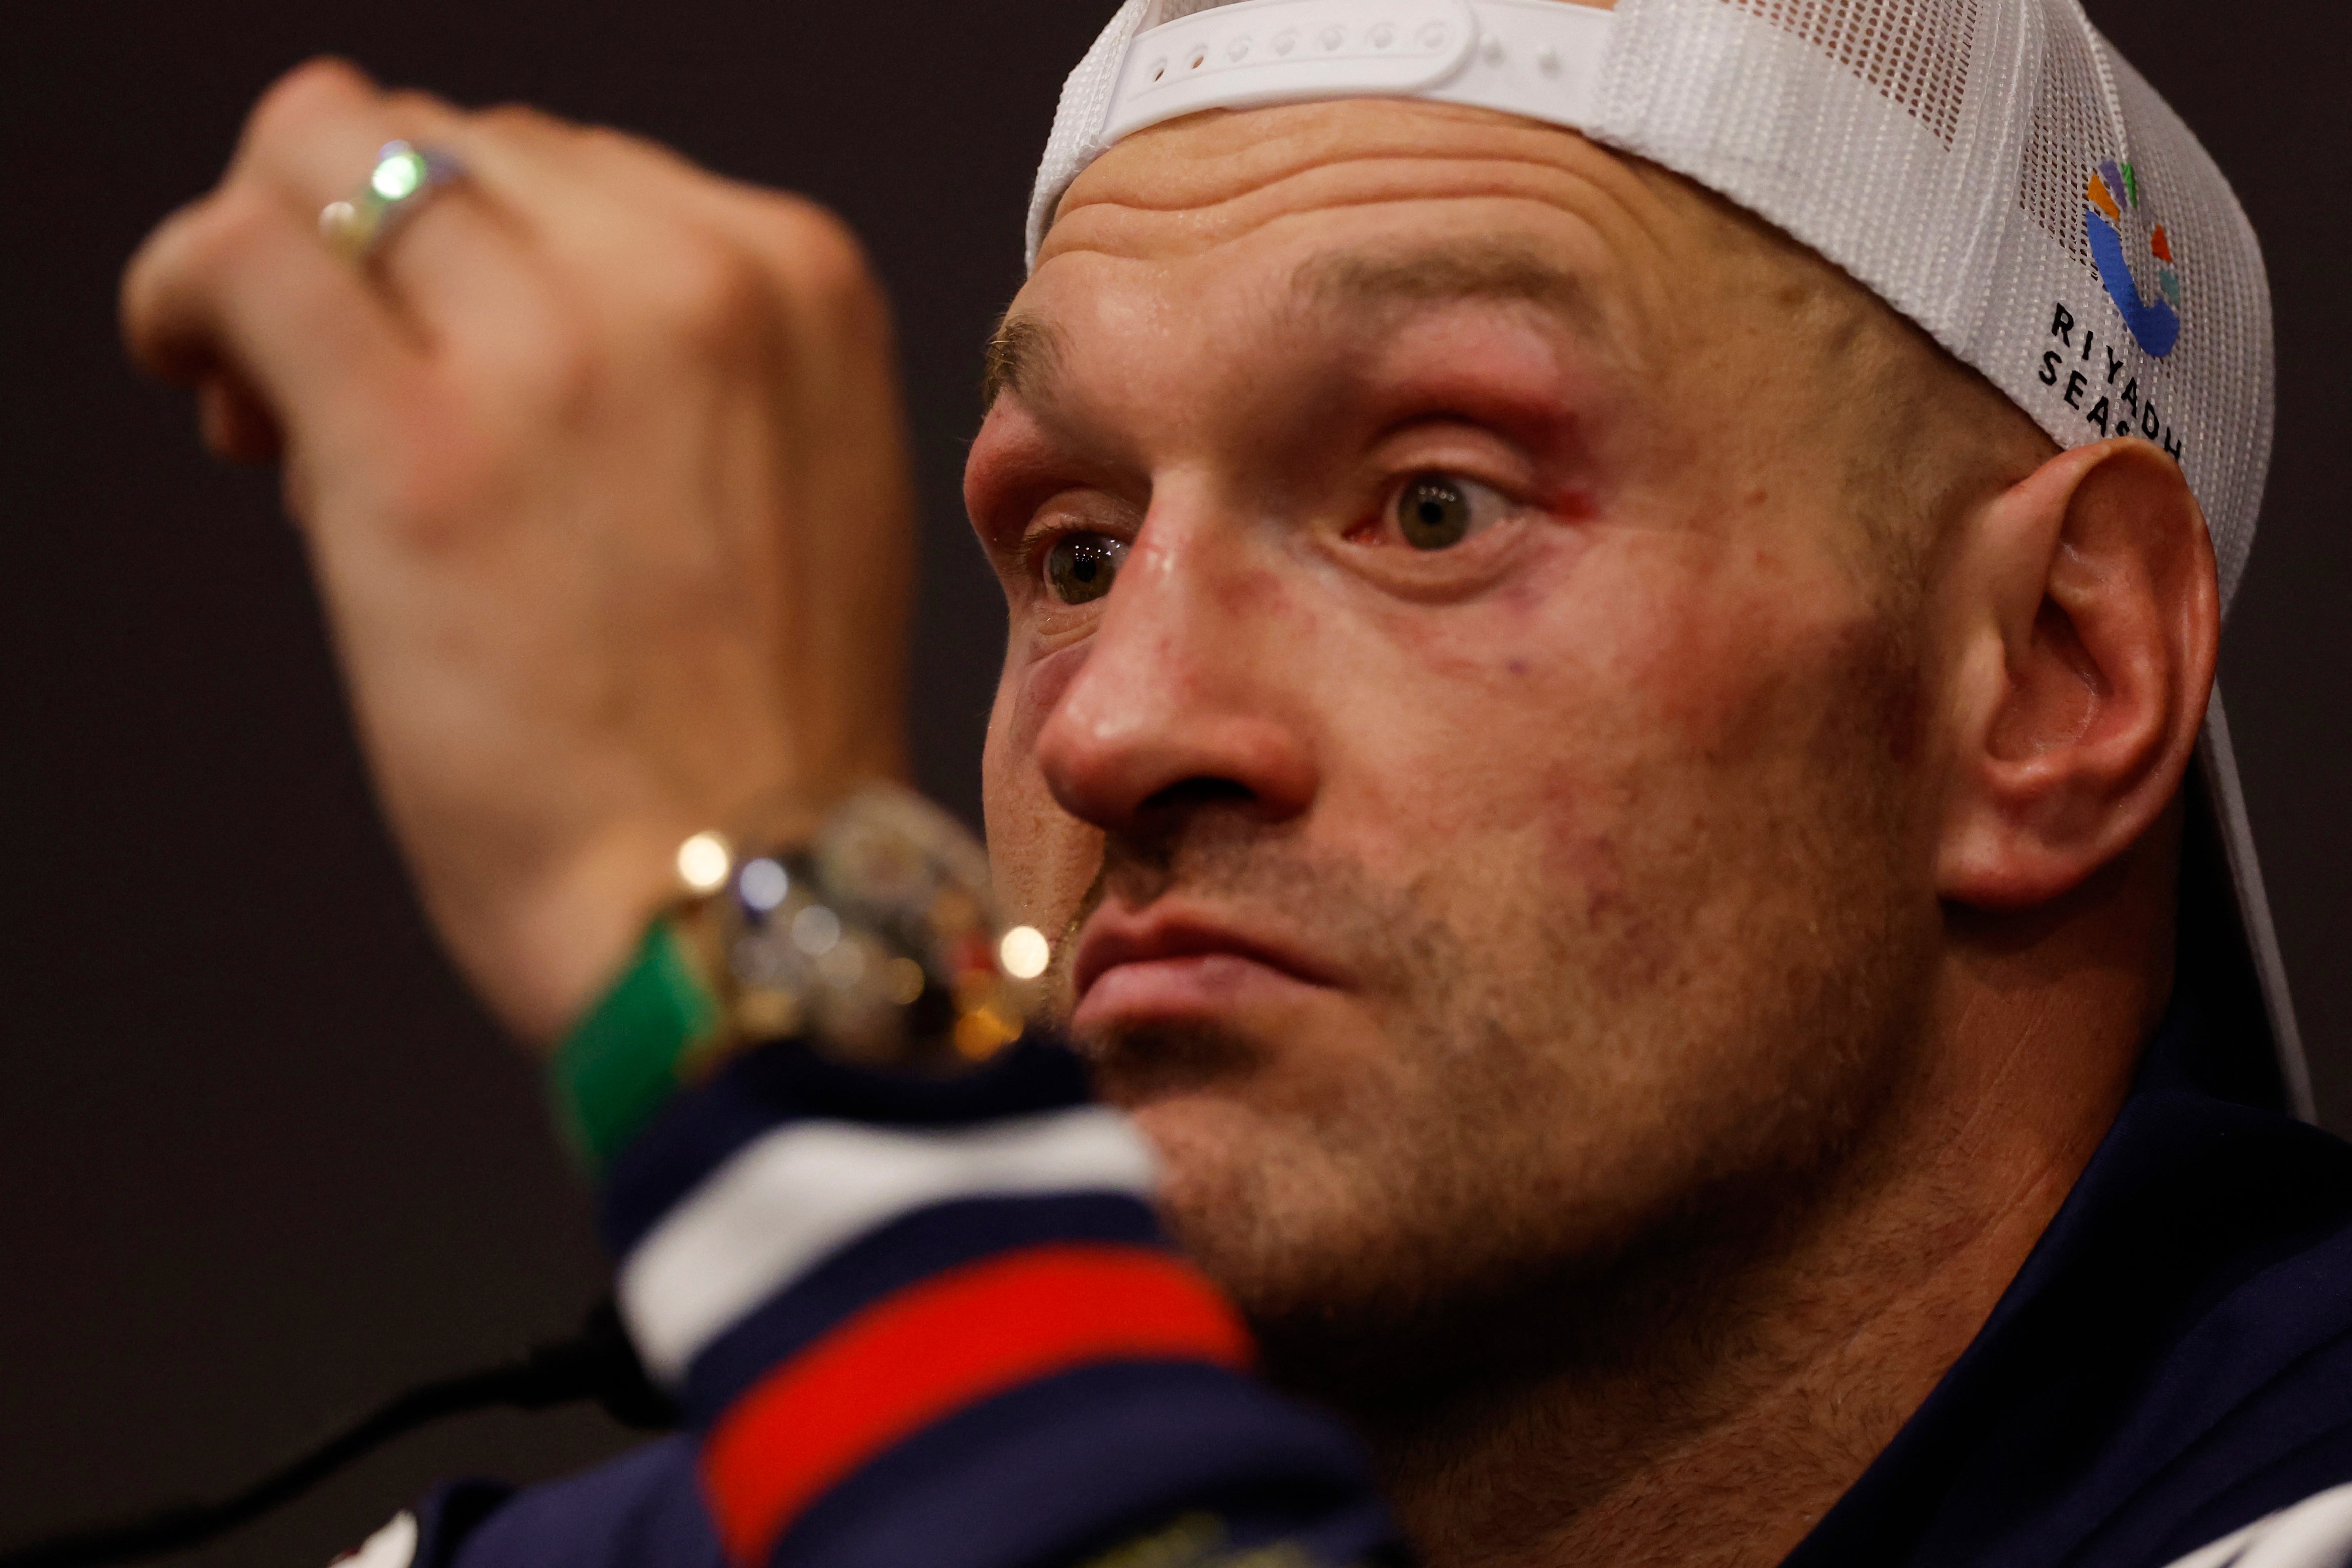 Tyson Fury during his post-fight press conference